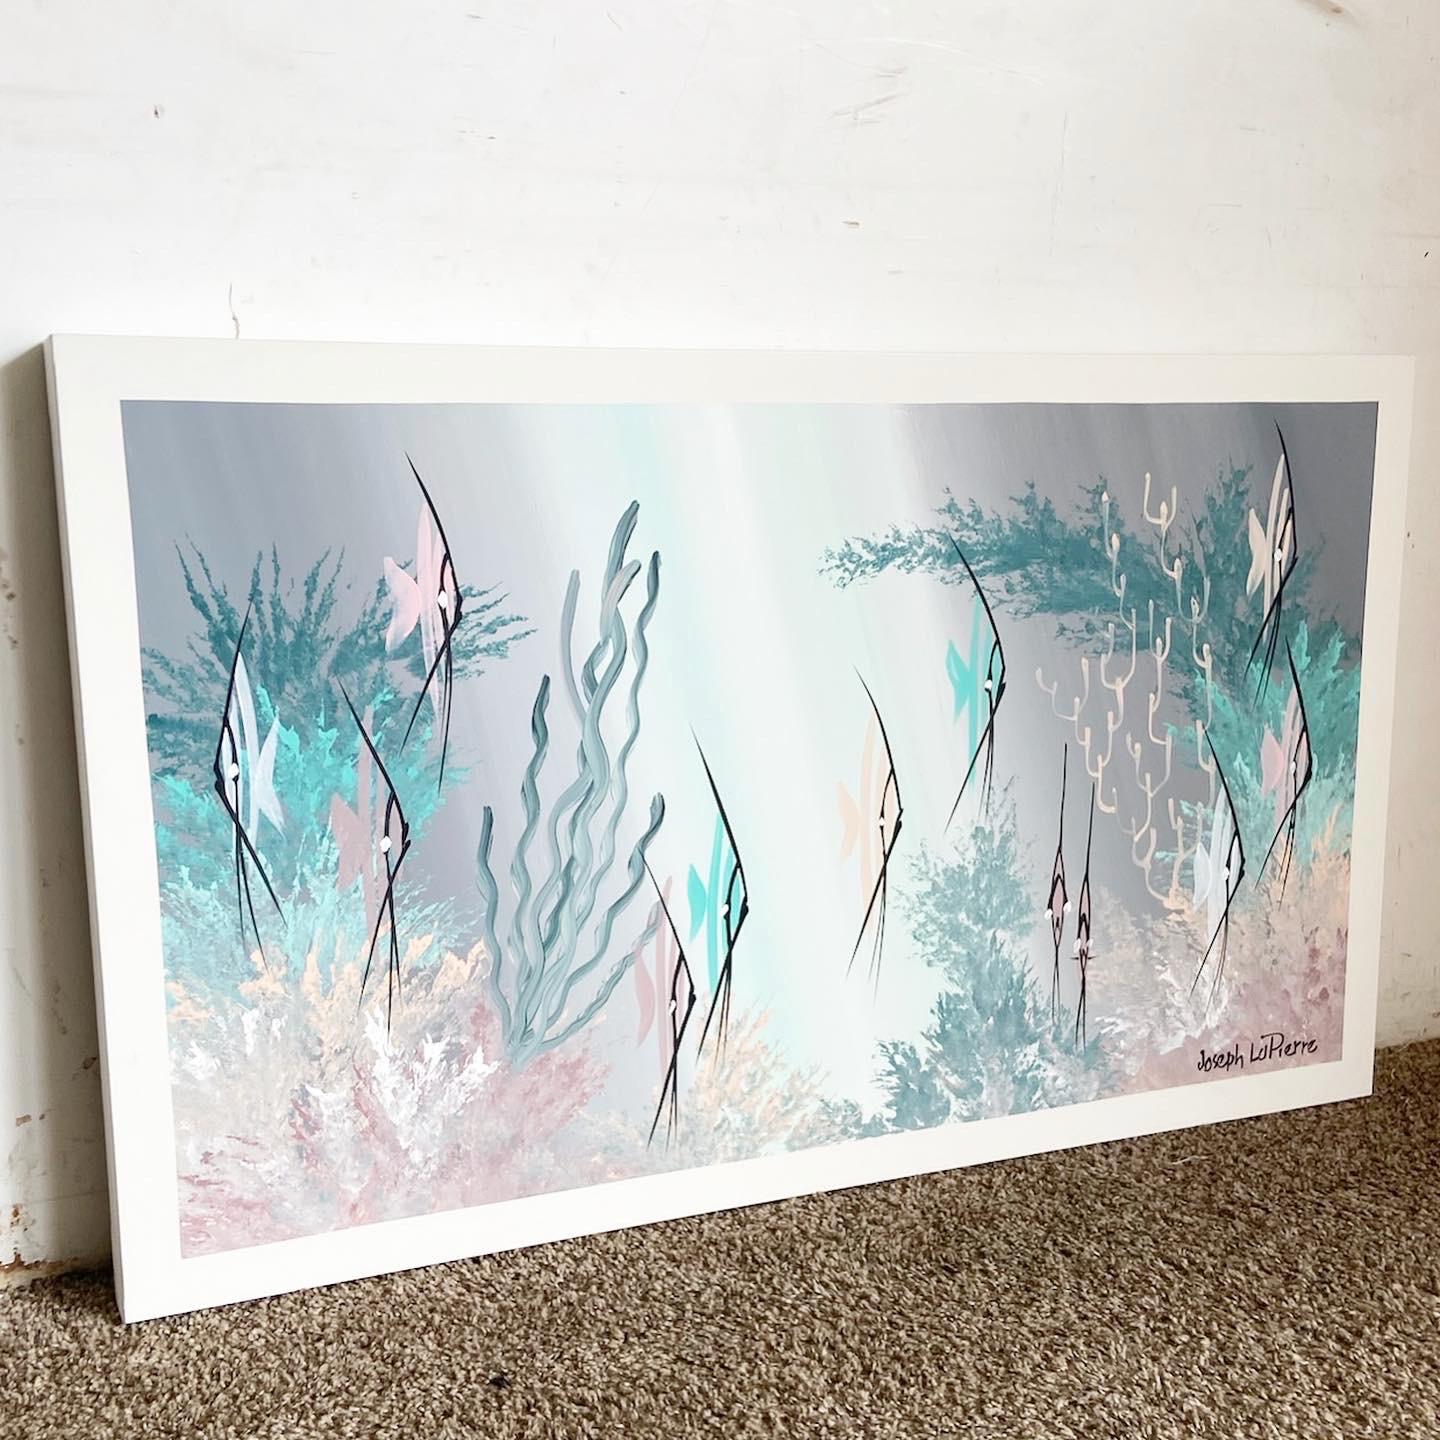 Dive into the depths with this Postmodern Abstract Fish Painting. Signed by the artist, it captures the vibrant underwater world, with abstract fish navigating a colorful reef. A blend of dynamic strokes and intricate patterns, it's a celebration of